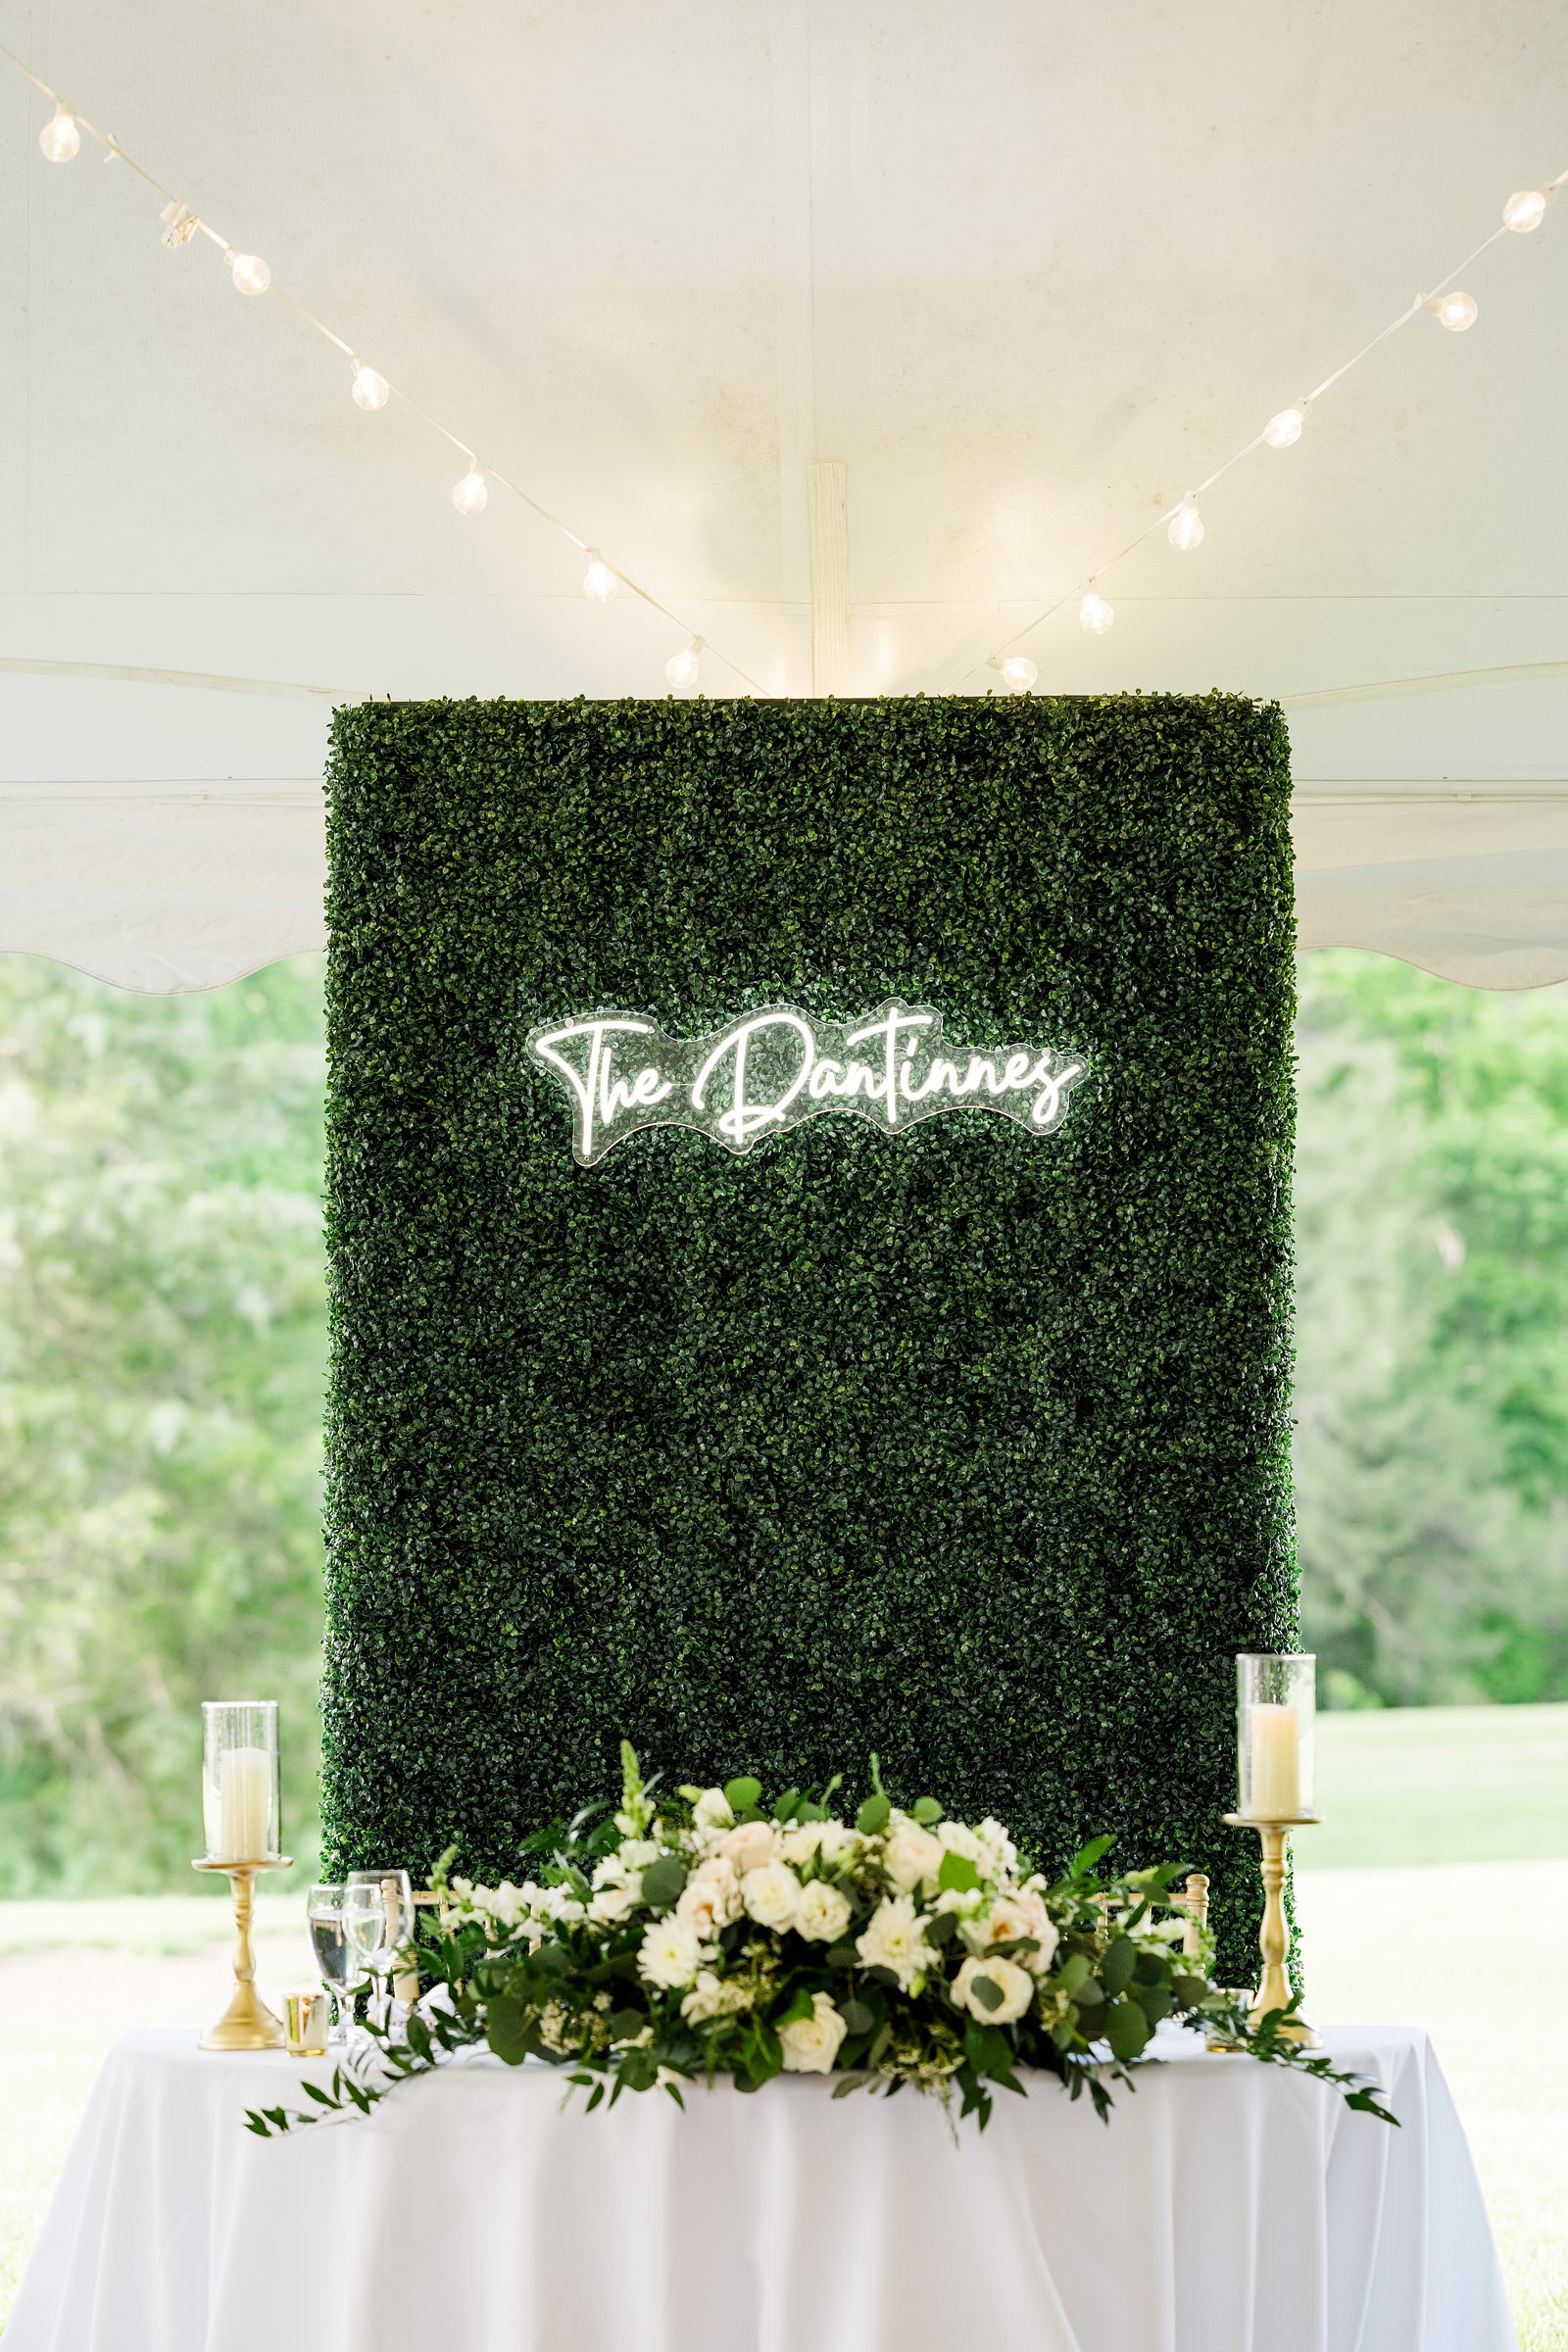 Custom Neon sign with name of the bride and groom reception decor for spring virginia wedding reception 